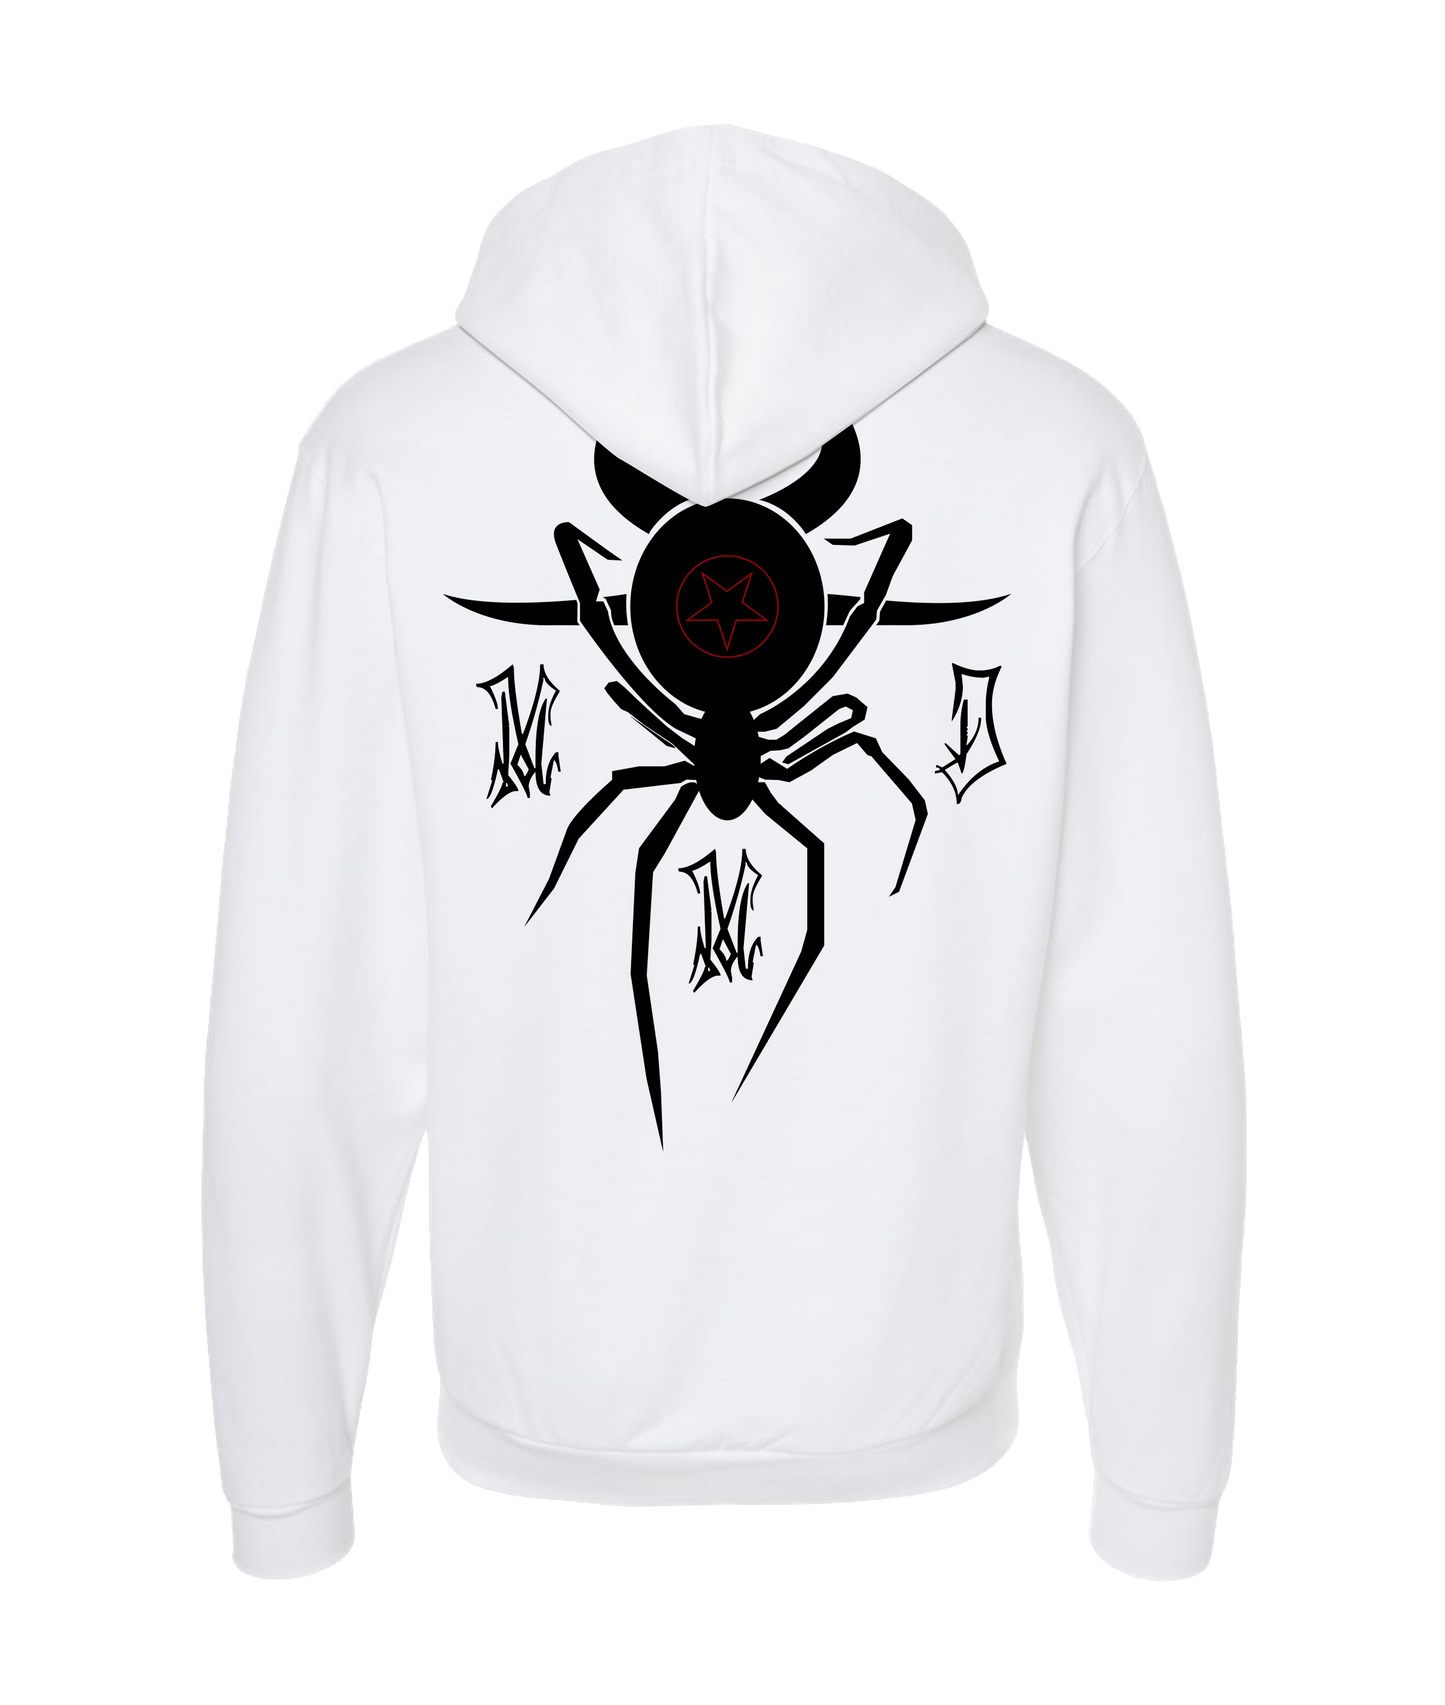 Man Made Disaster Threads - Fuck emotions - White Zip Up Hoodie